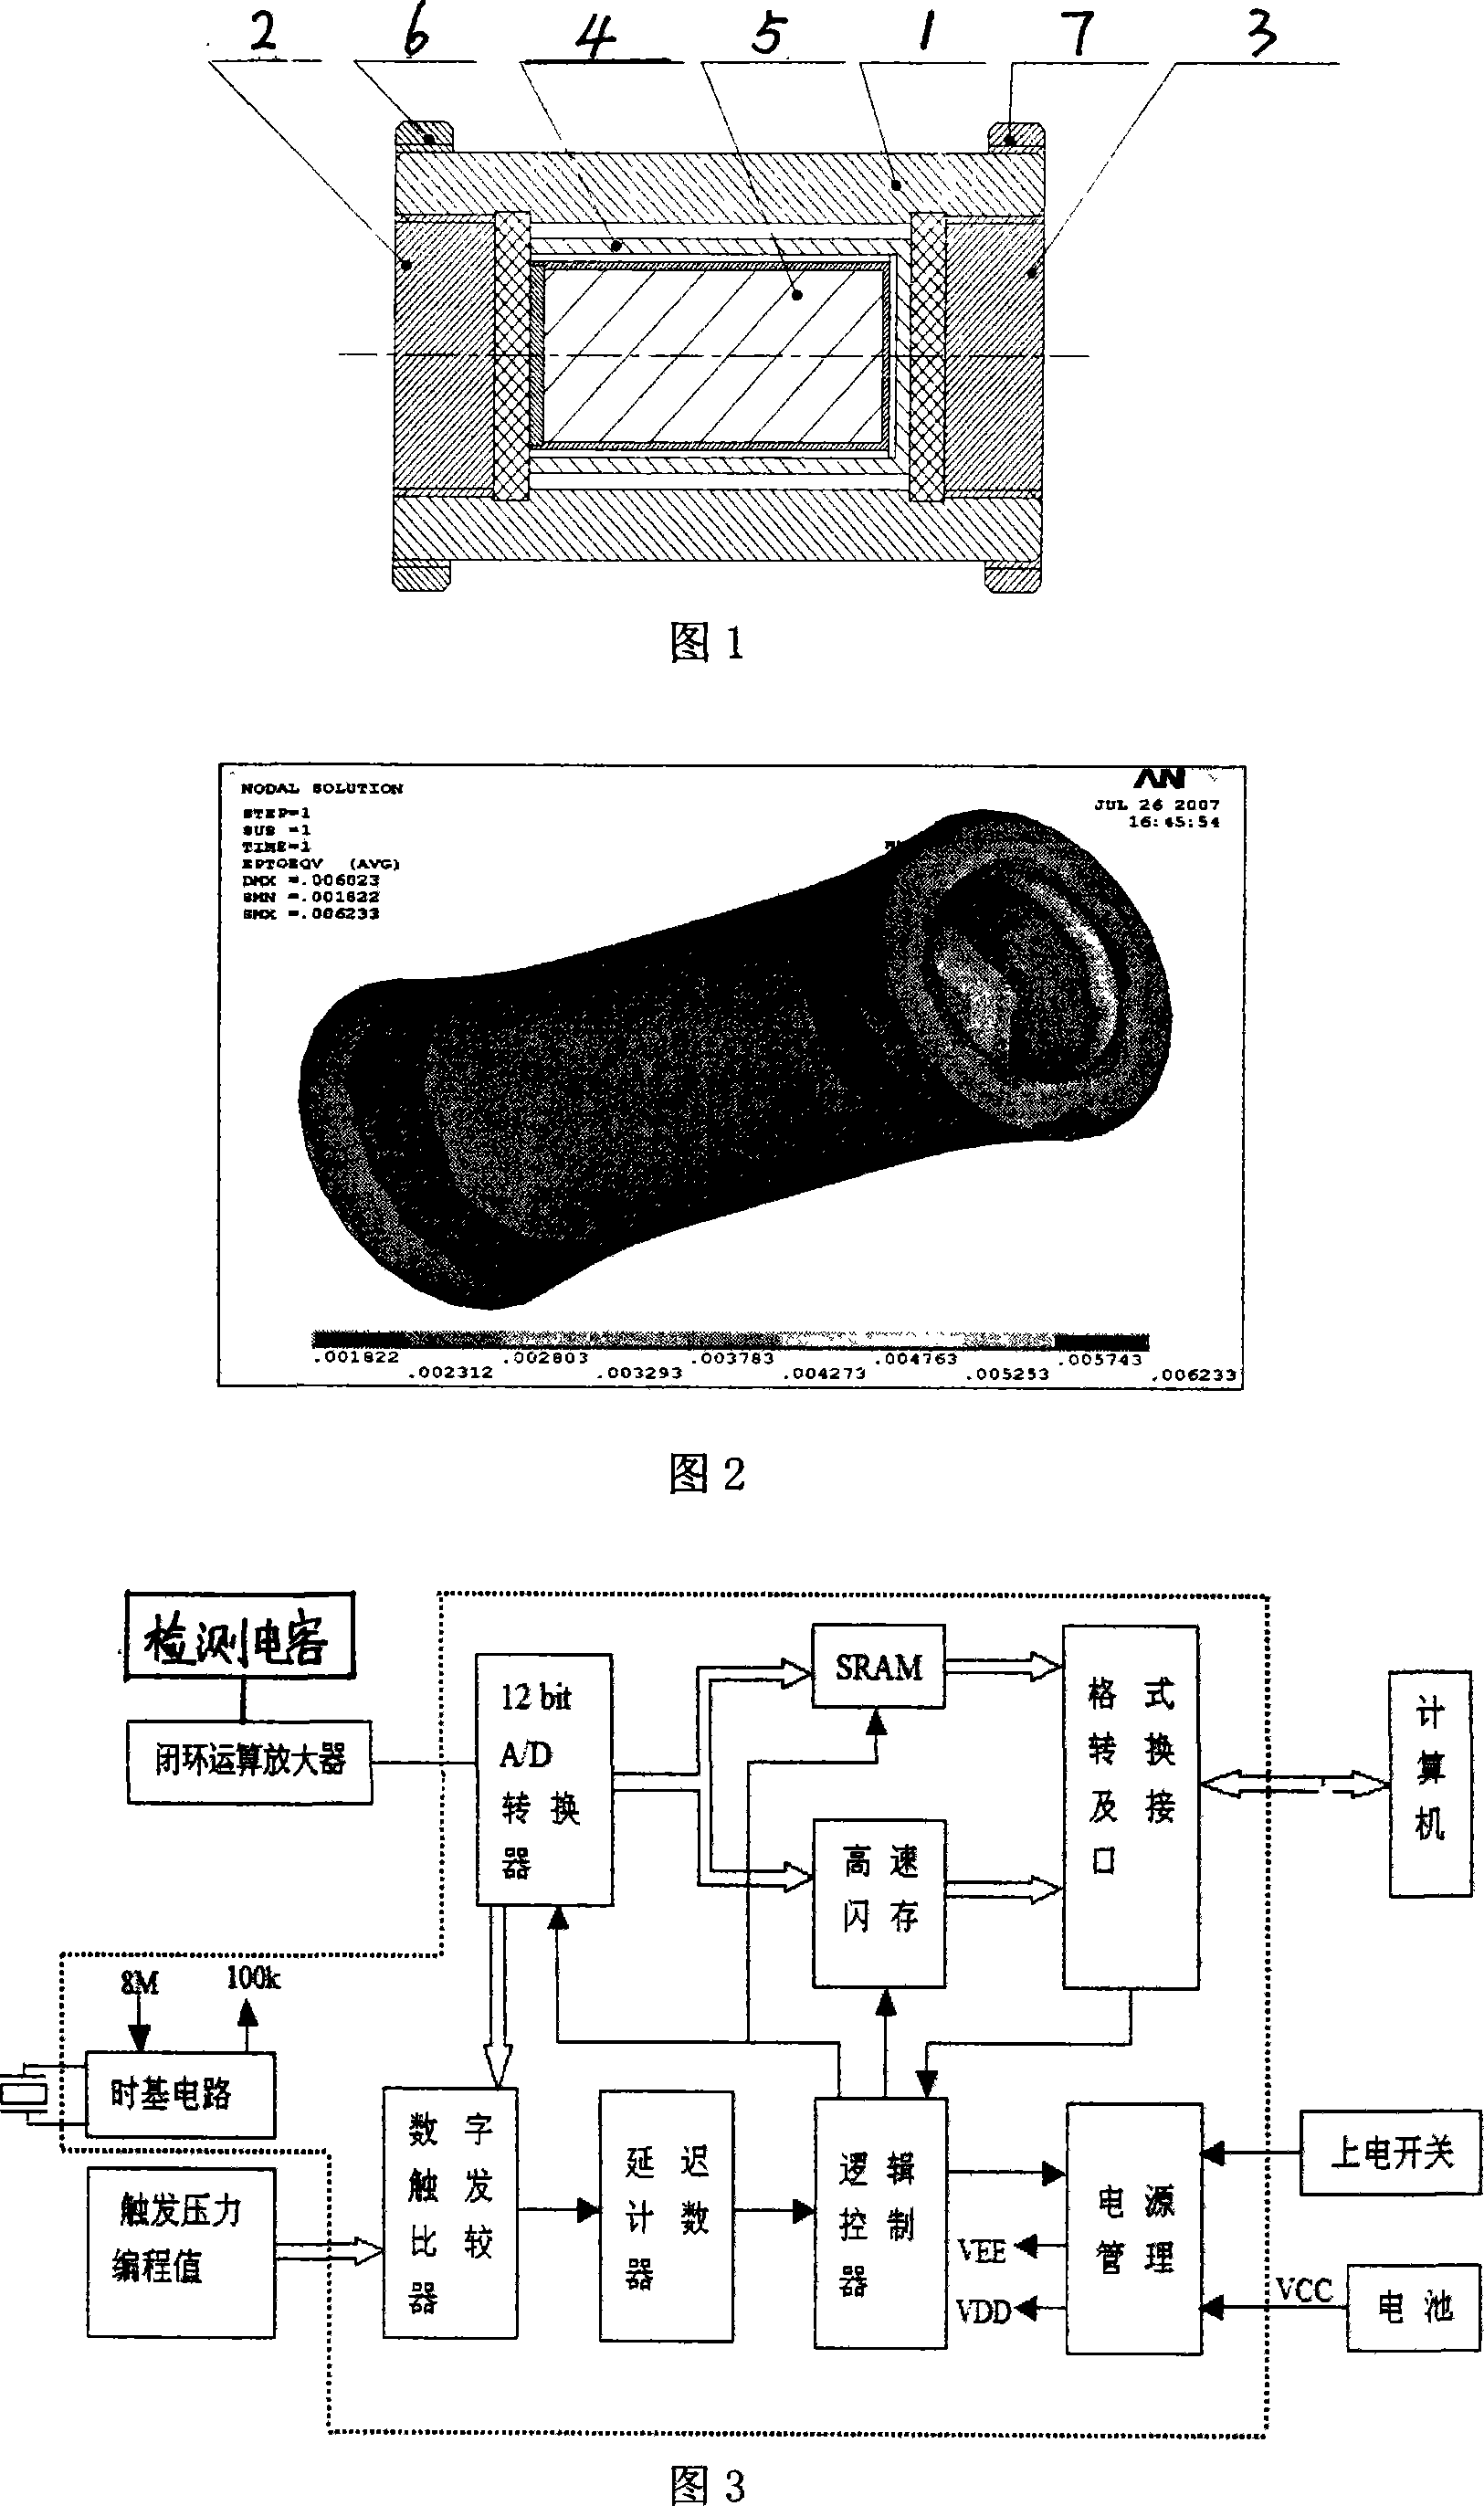 Minisize condenser type sensing, bearing structure integrated electric voltage detector